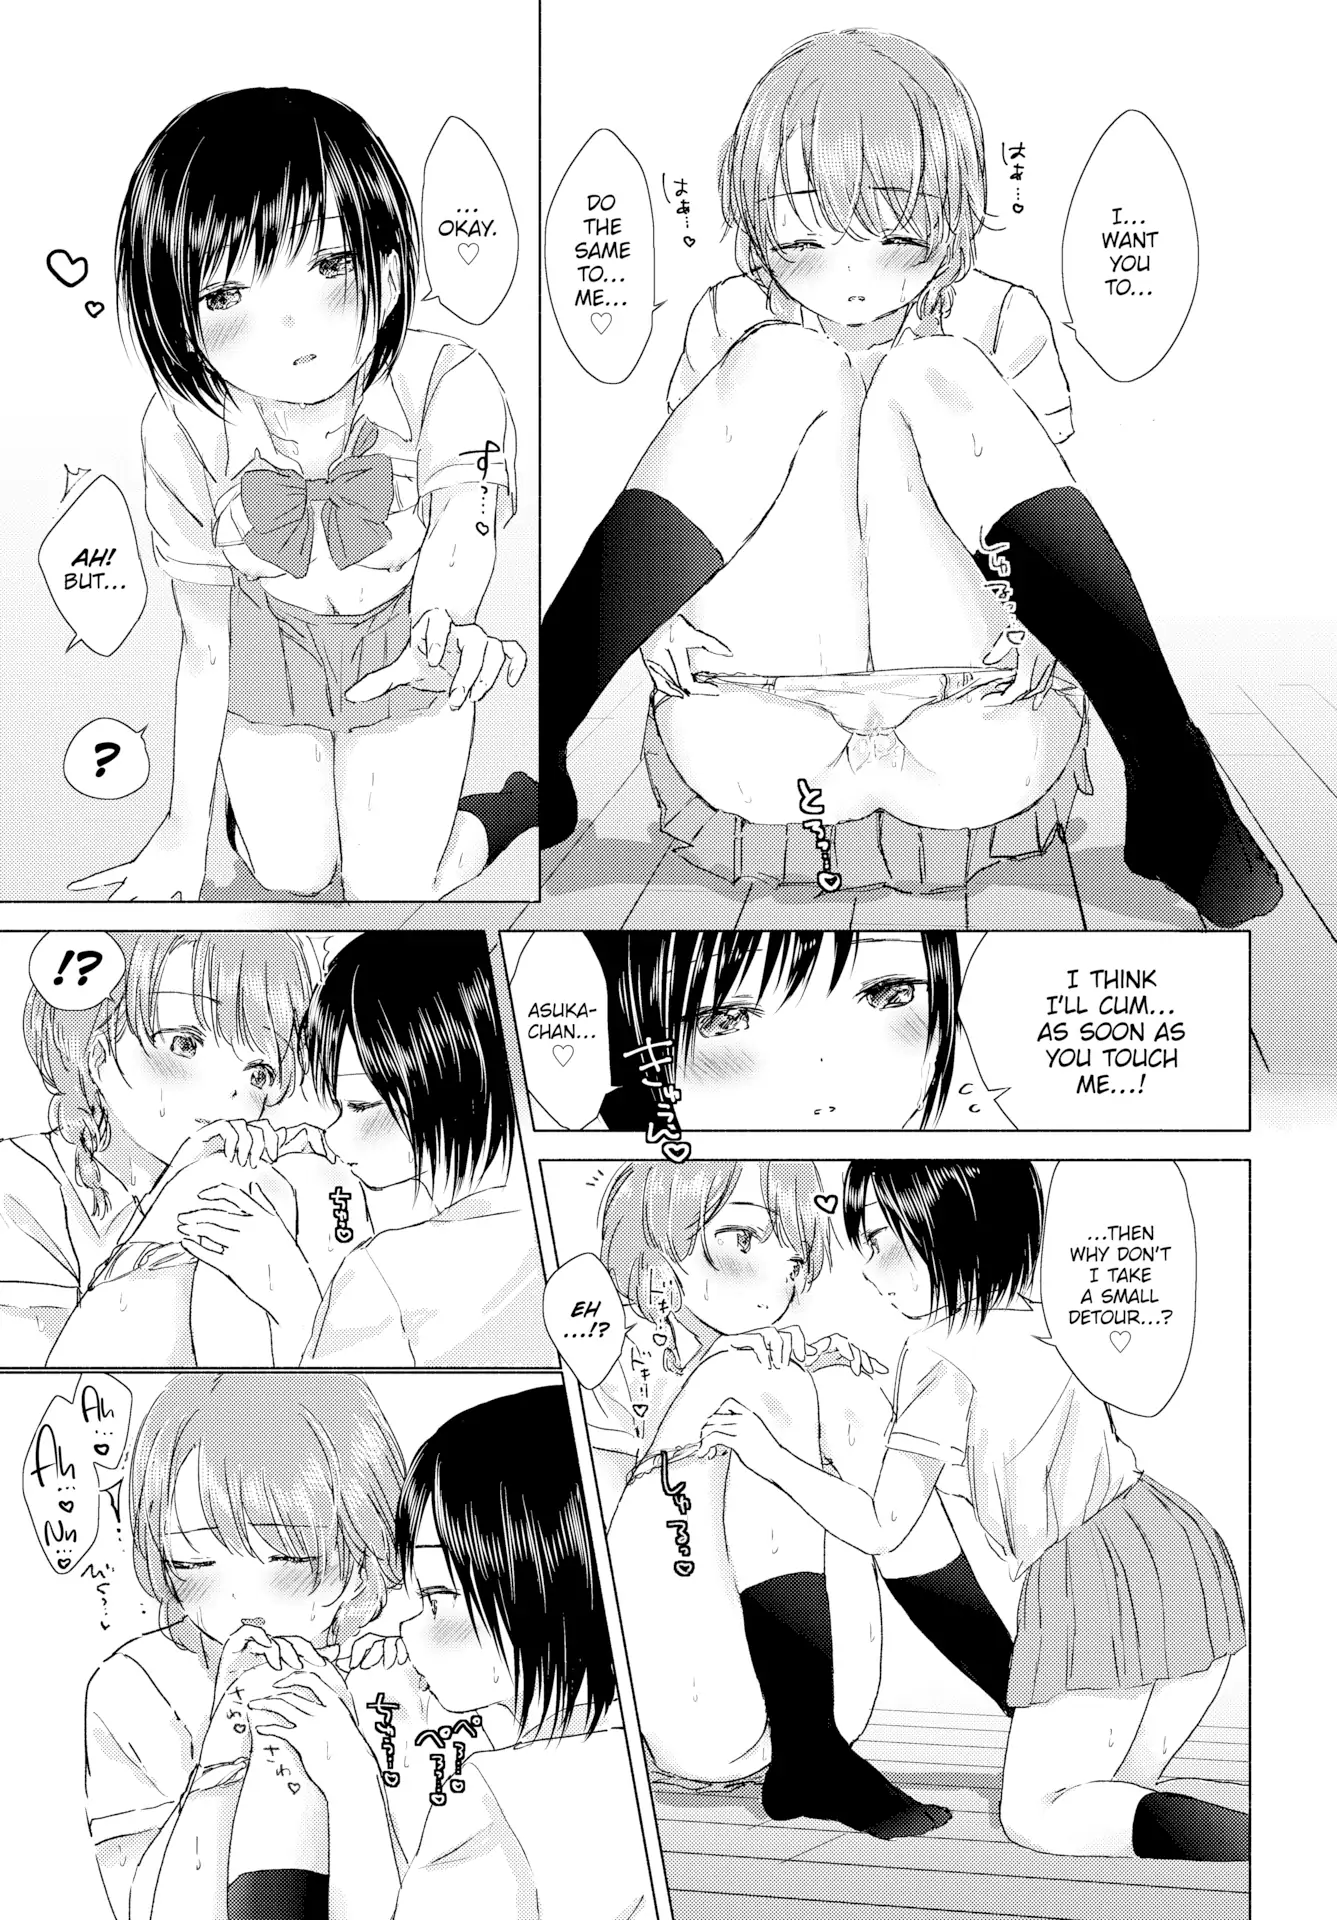 When We Get Home, Asuka-chan and I Will… Chapter 1 - page 17